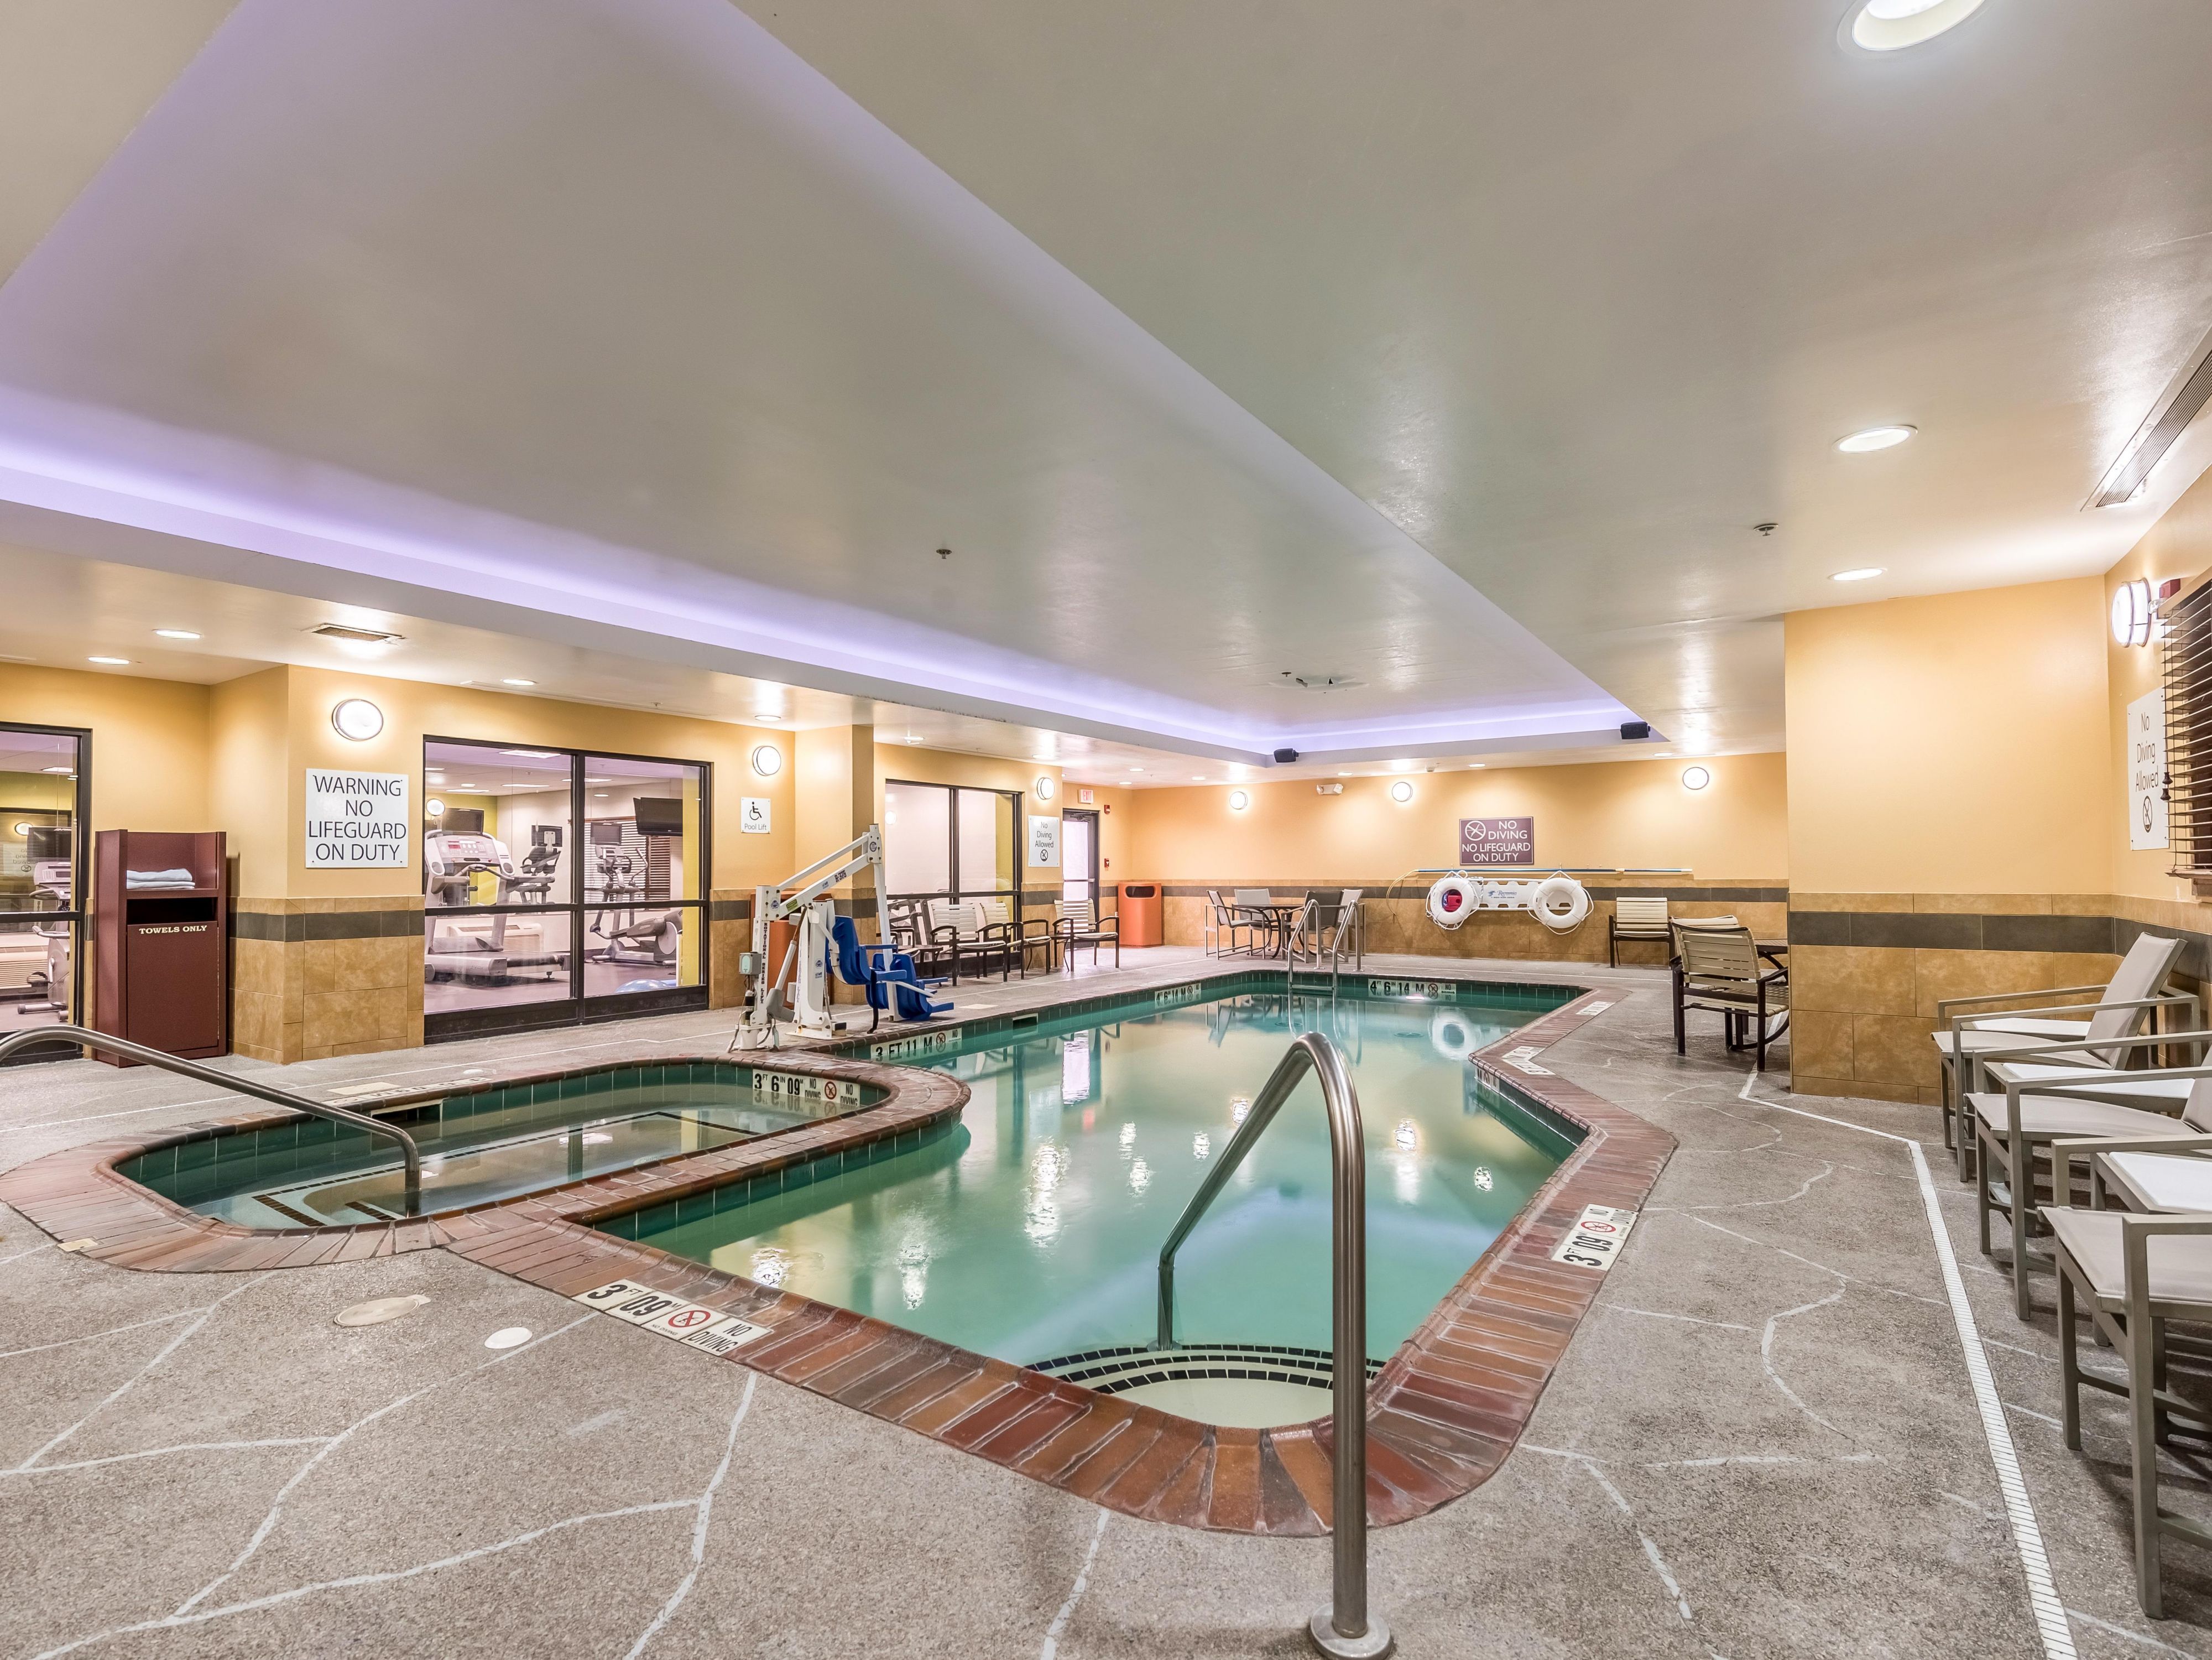 Bring a swimsuit and enjoy a break in your schedule to rest and relax in our whirlpool or splash and play in our heated indoor pool. Open daily from 6am to 10pm, guests can feel the splash of summer all year round.